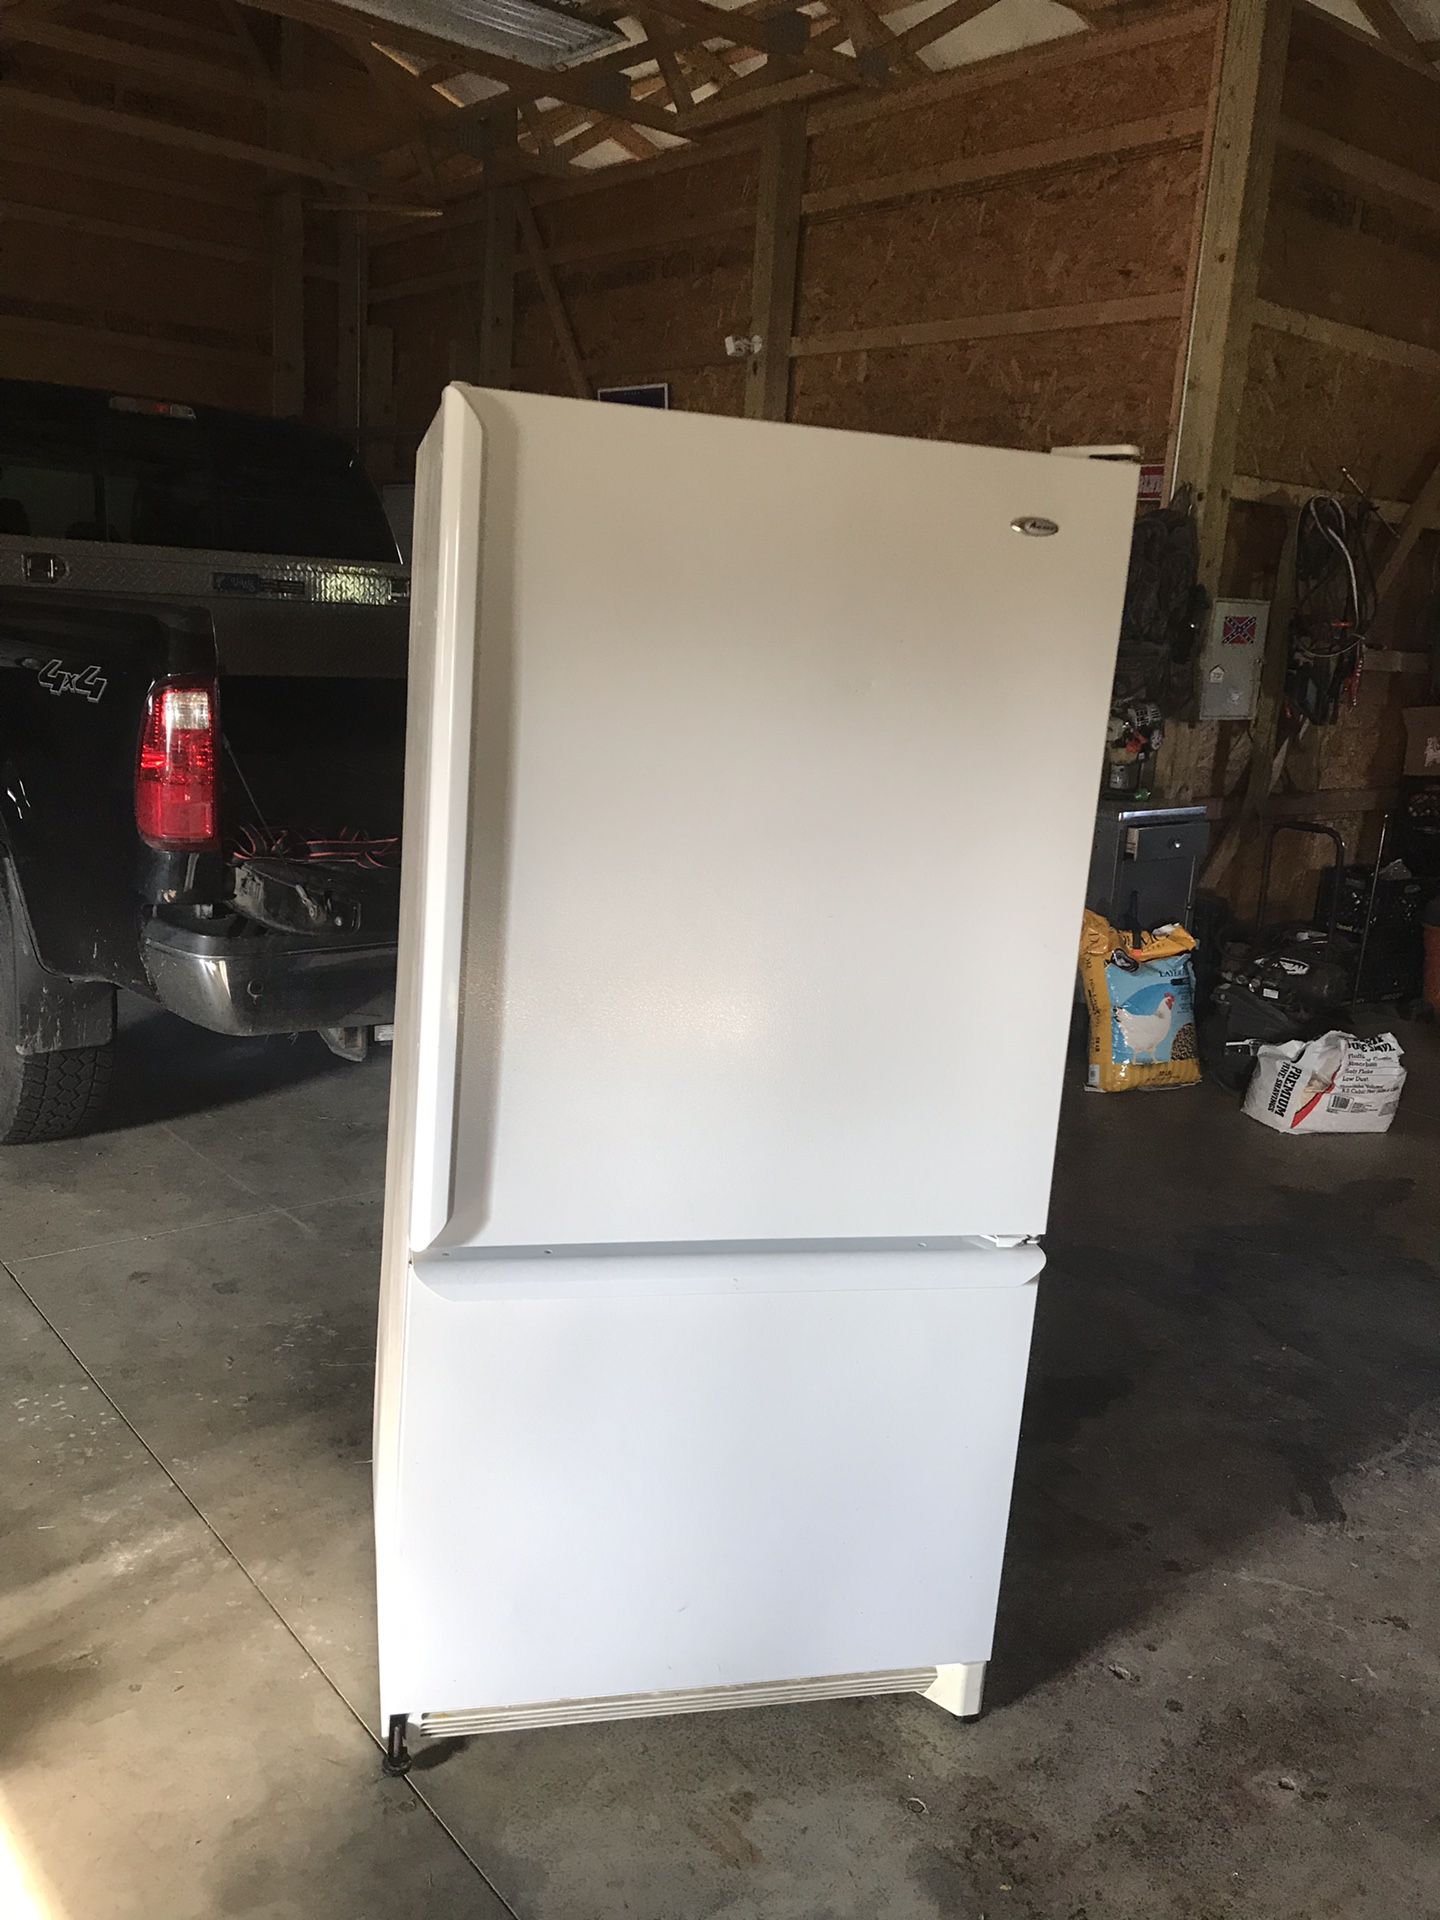 2 year old white over/under Amana refrigerator 32 inches wide by 30.5inches deep by 68 inches tall, works great no issues